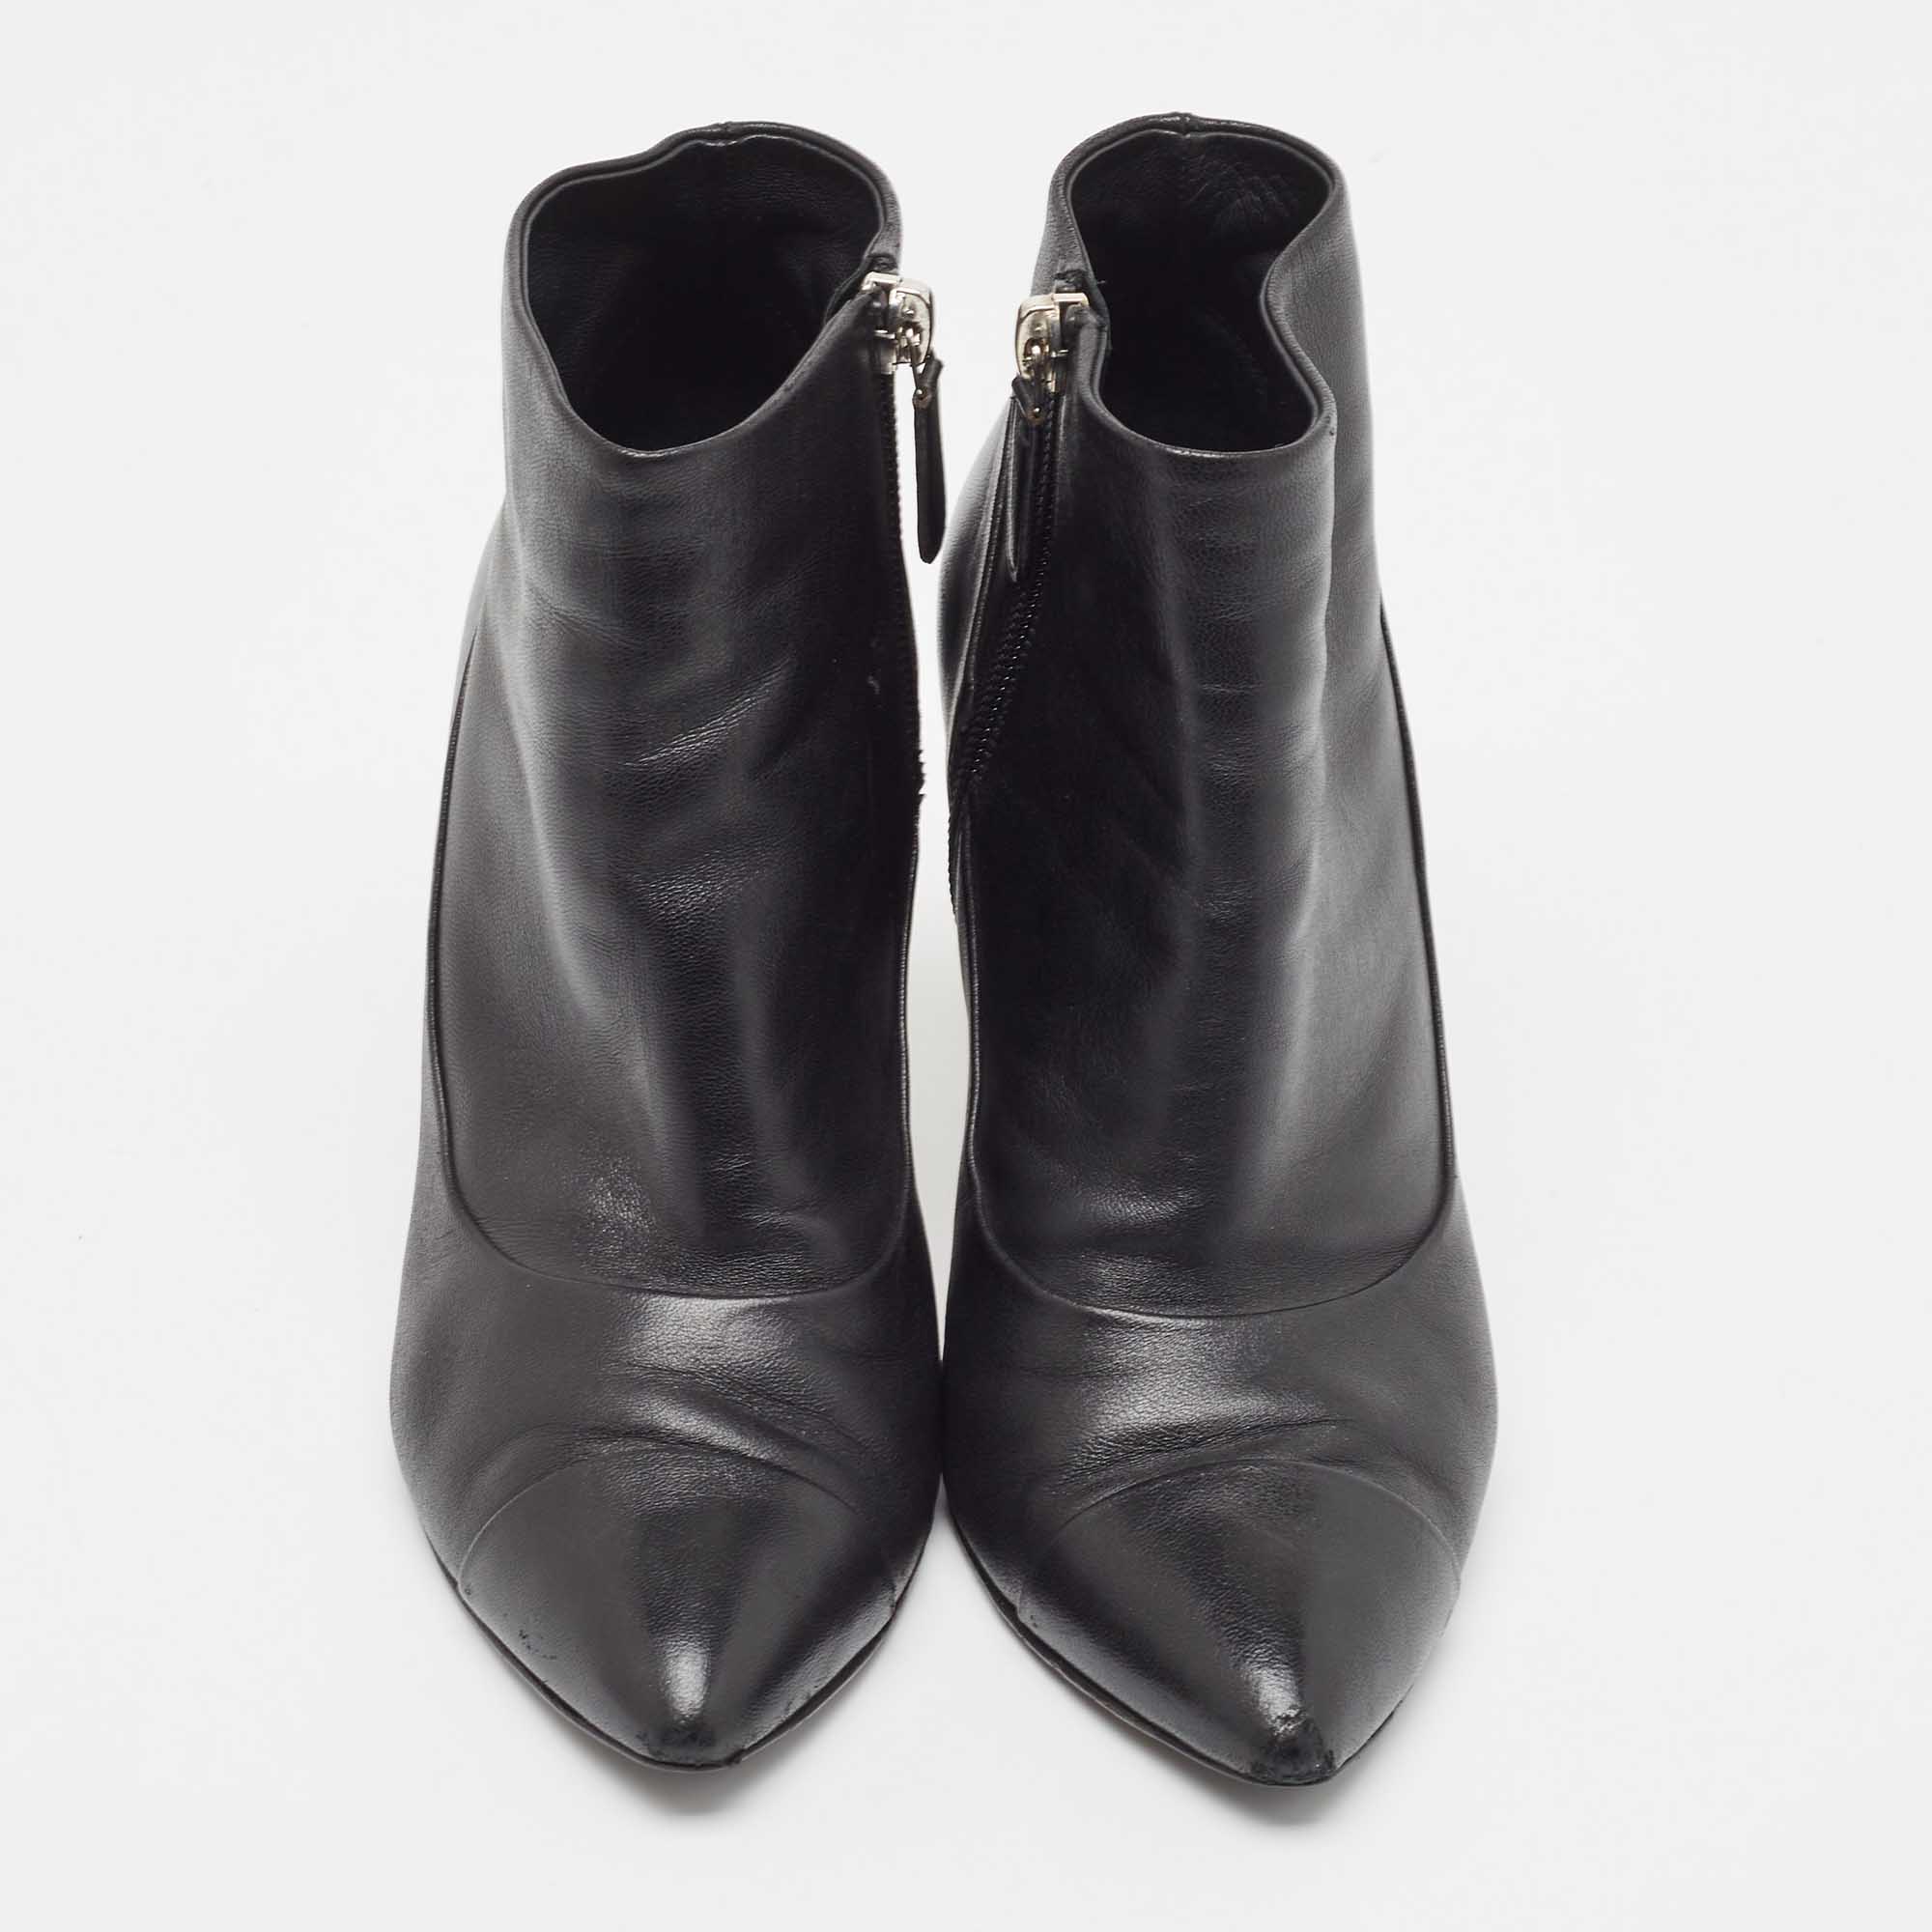 Chanel Black Leather Ankle Boots Size 36.5